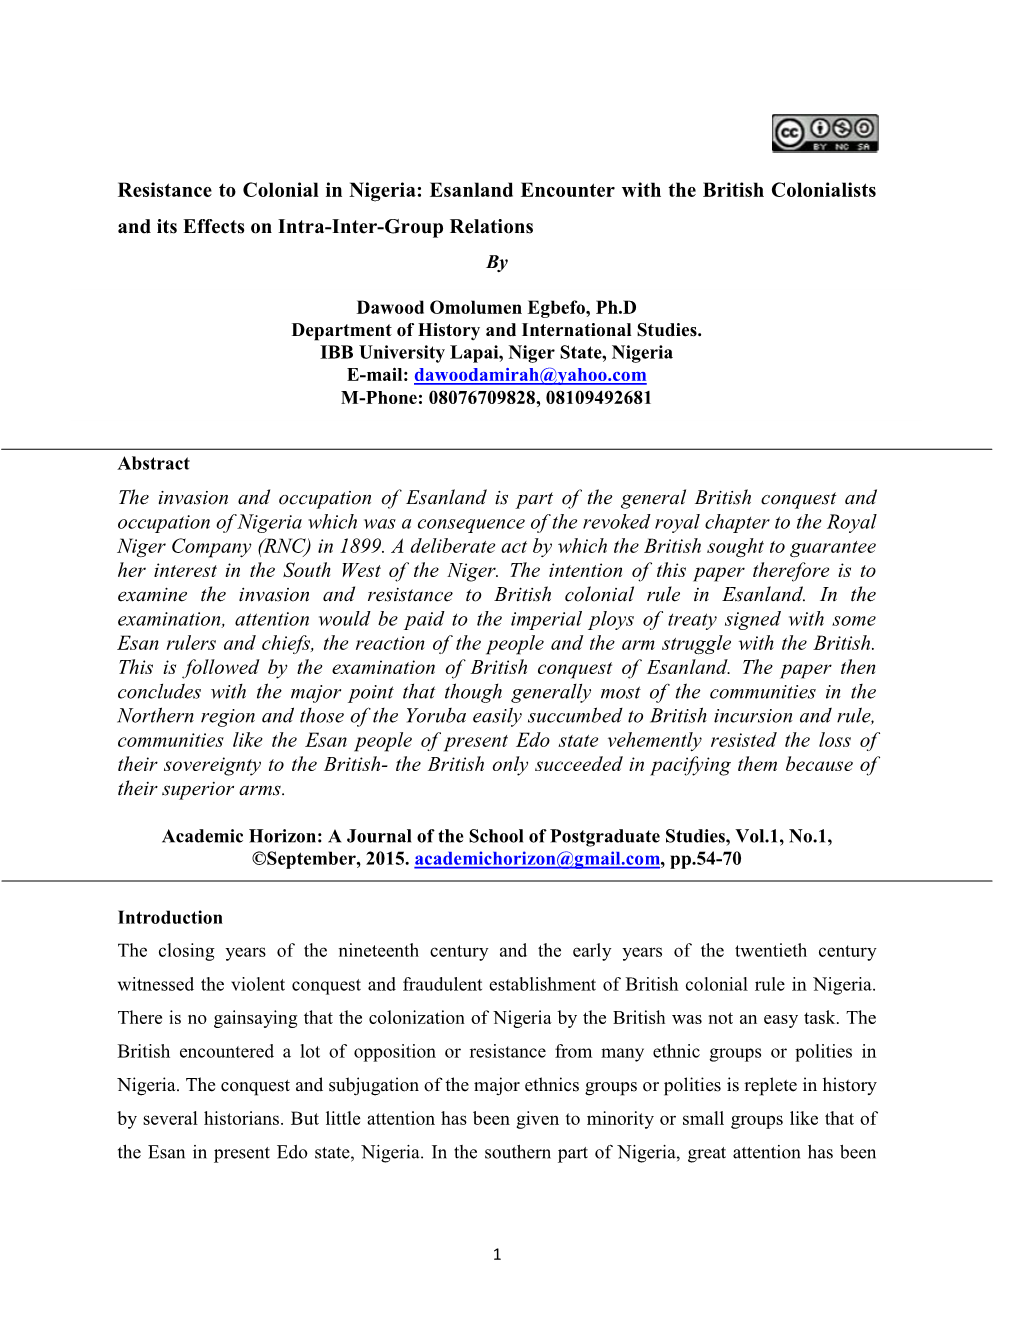 Resistance to Colonial in Nigeria: Esanland Encounter with the British Colonialists and Its Effects on Intra-Inter-Group Relations By